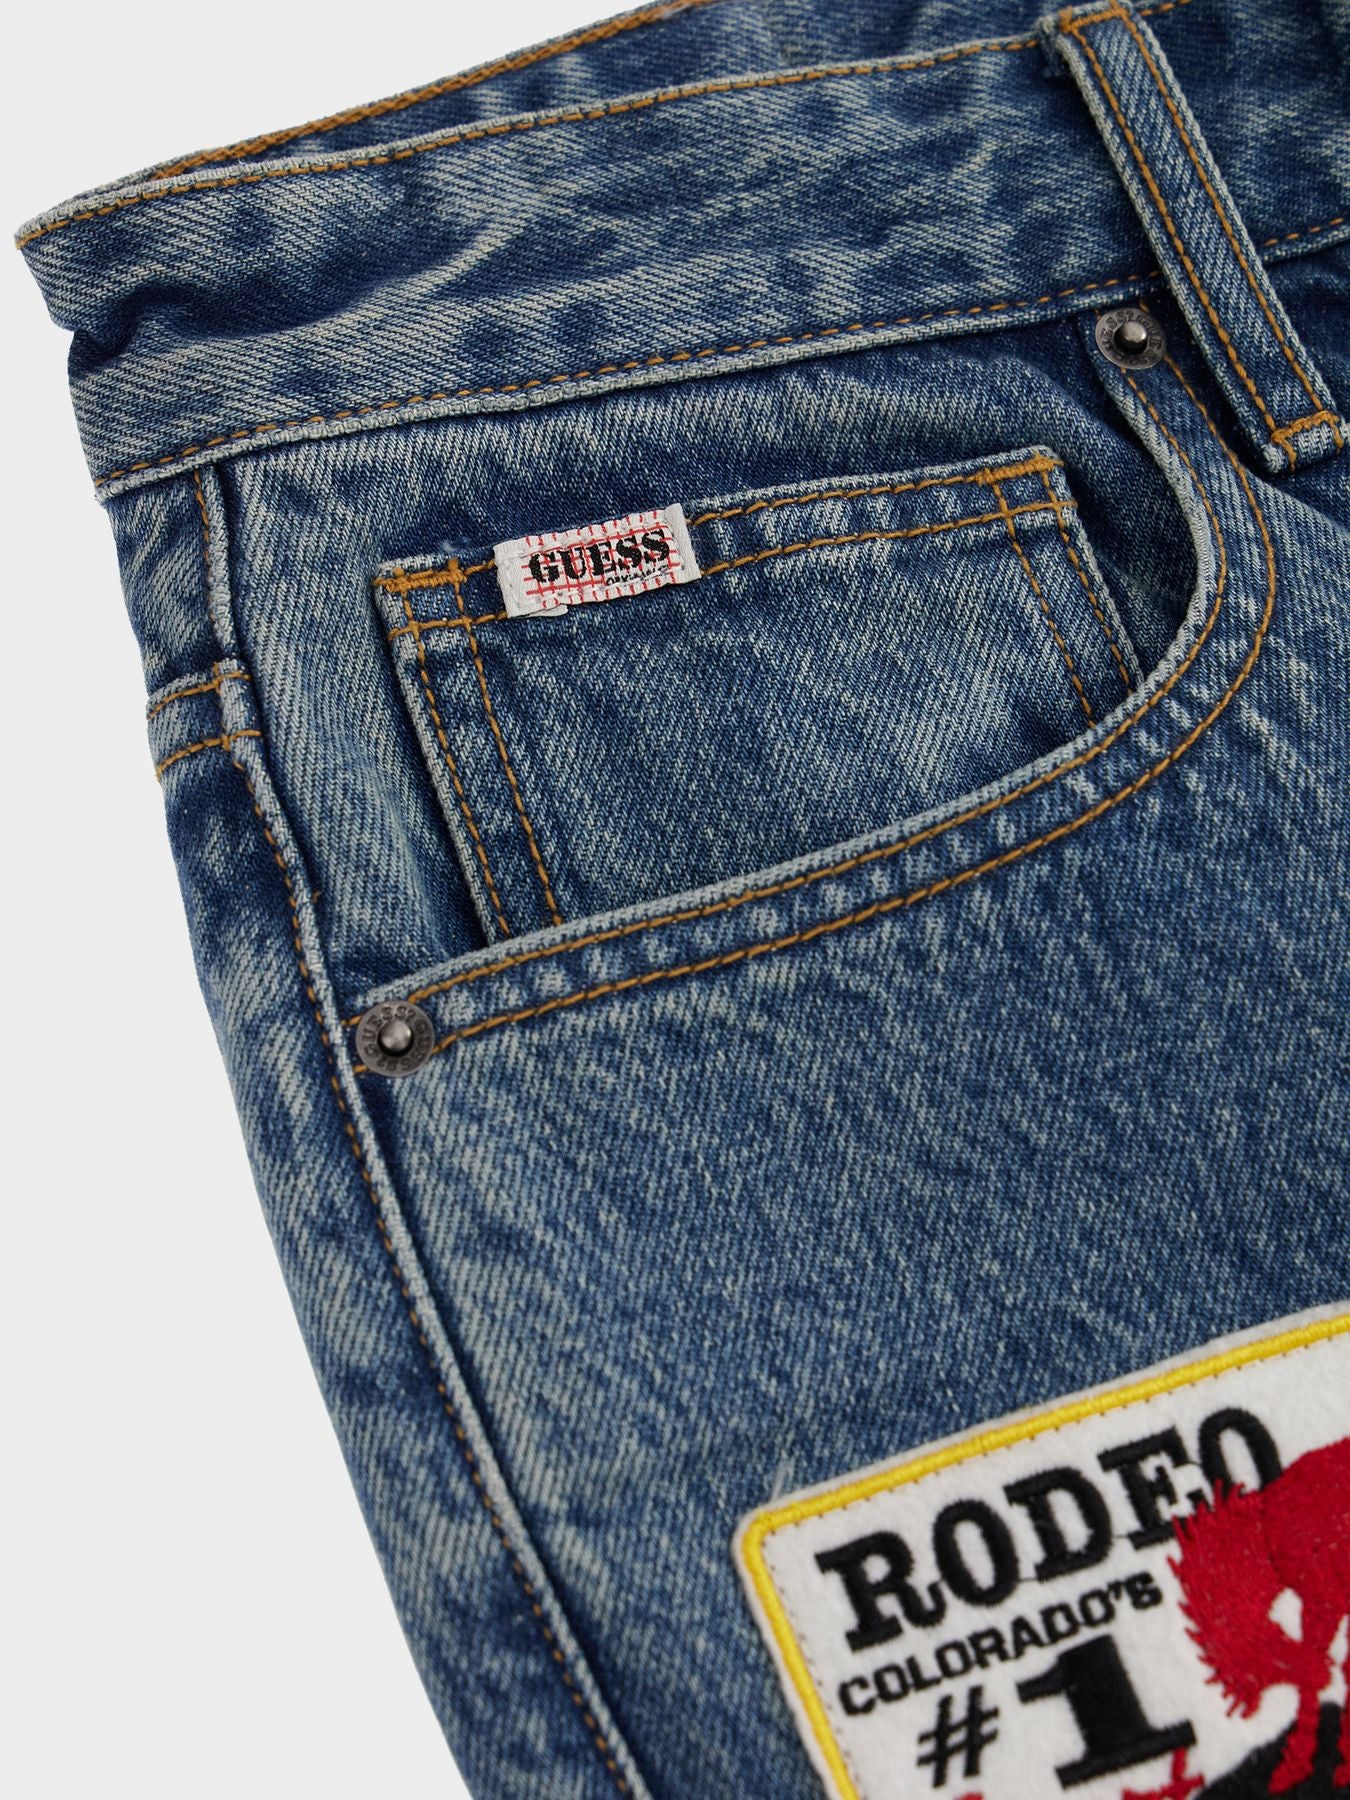 Jeans patch Guess Collab.